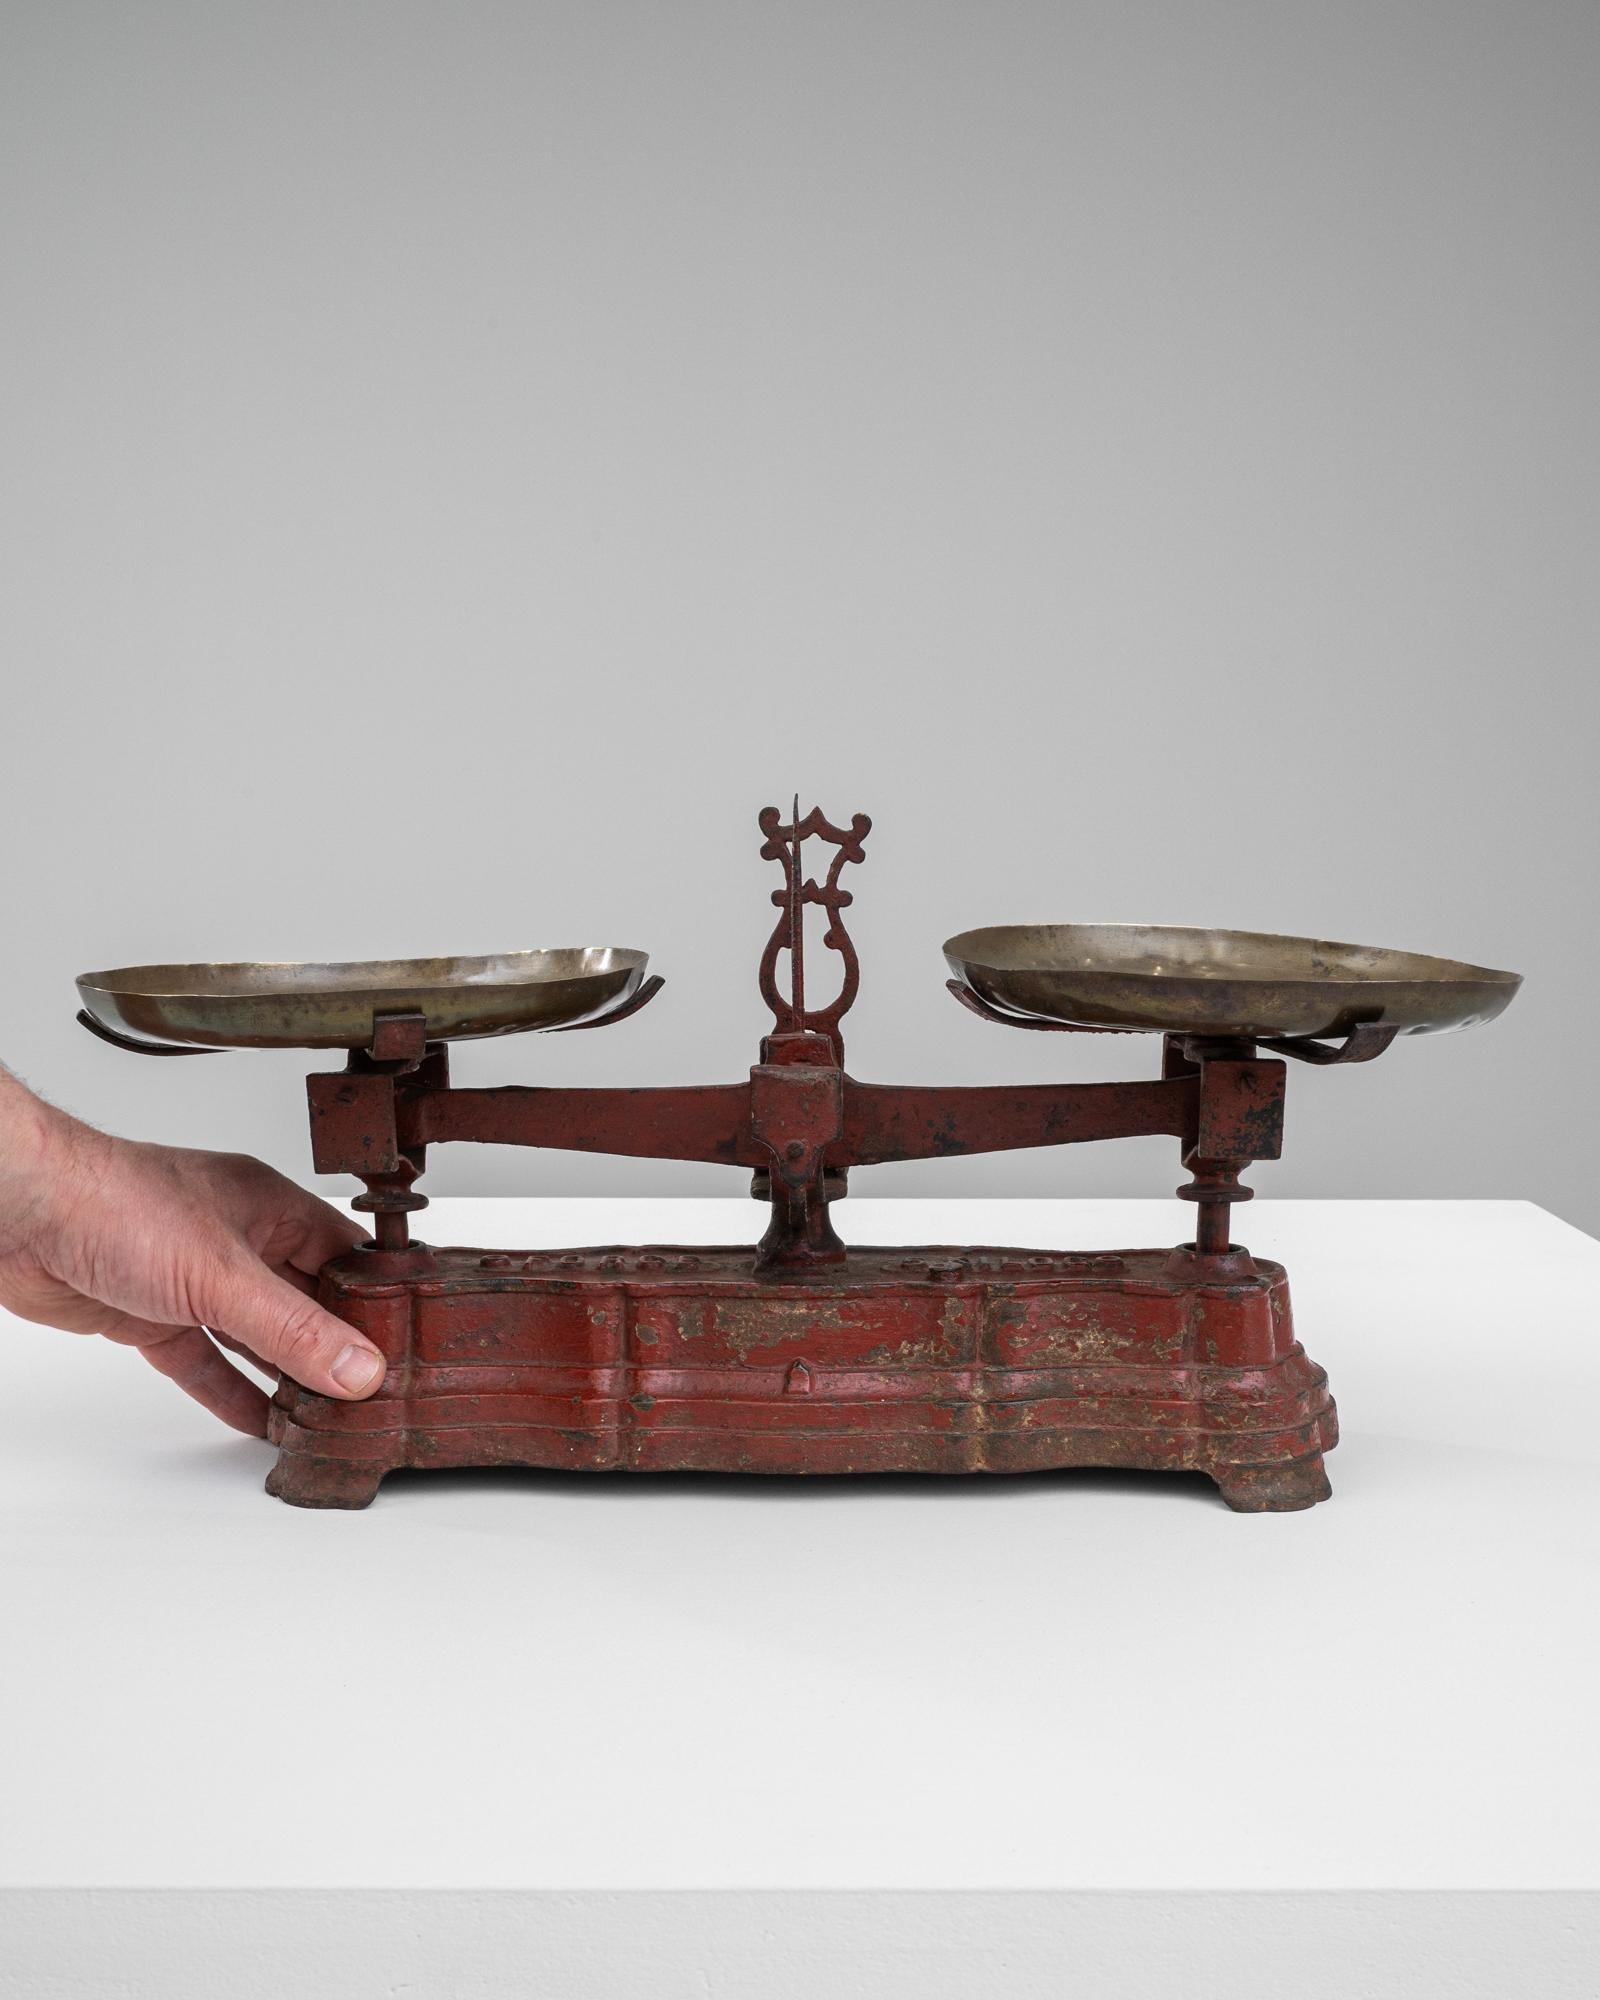 This 19th Century French Metal Scale is a striking artifact that captures the essence of historical commerce and French provincial life. Clad in its original red paint, now distressed with time, it speaks to its years of service and the hands it has